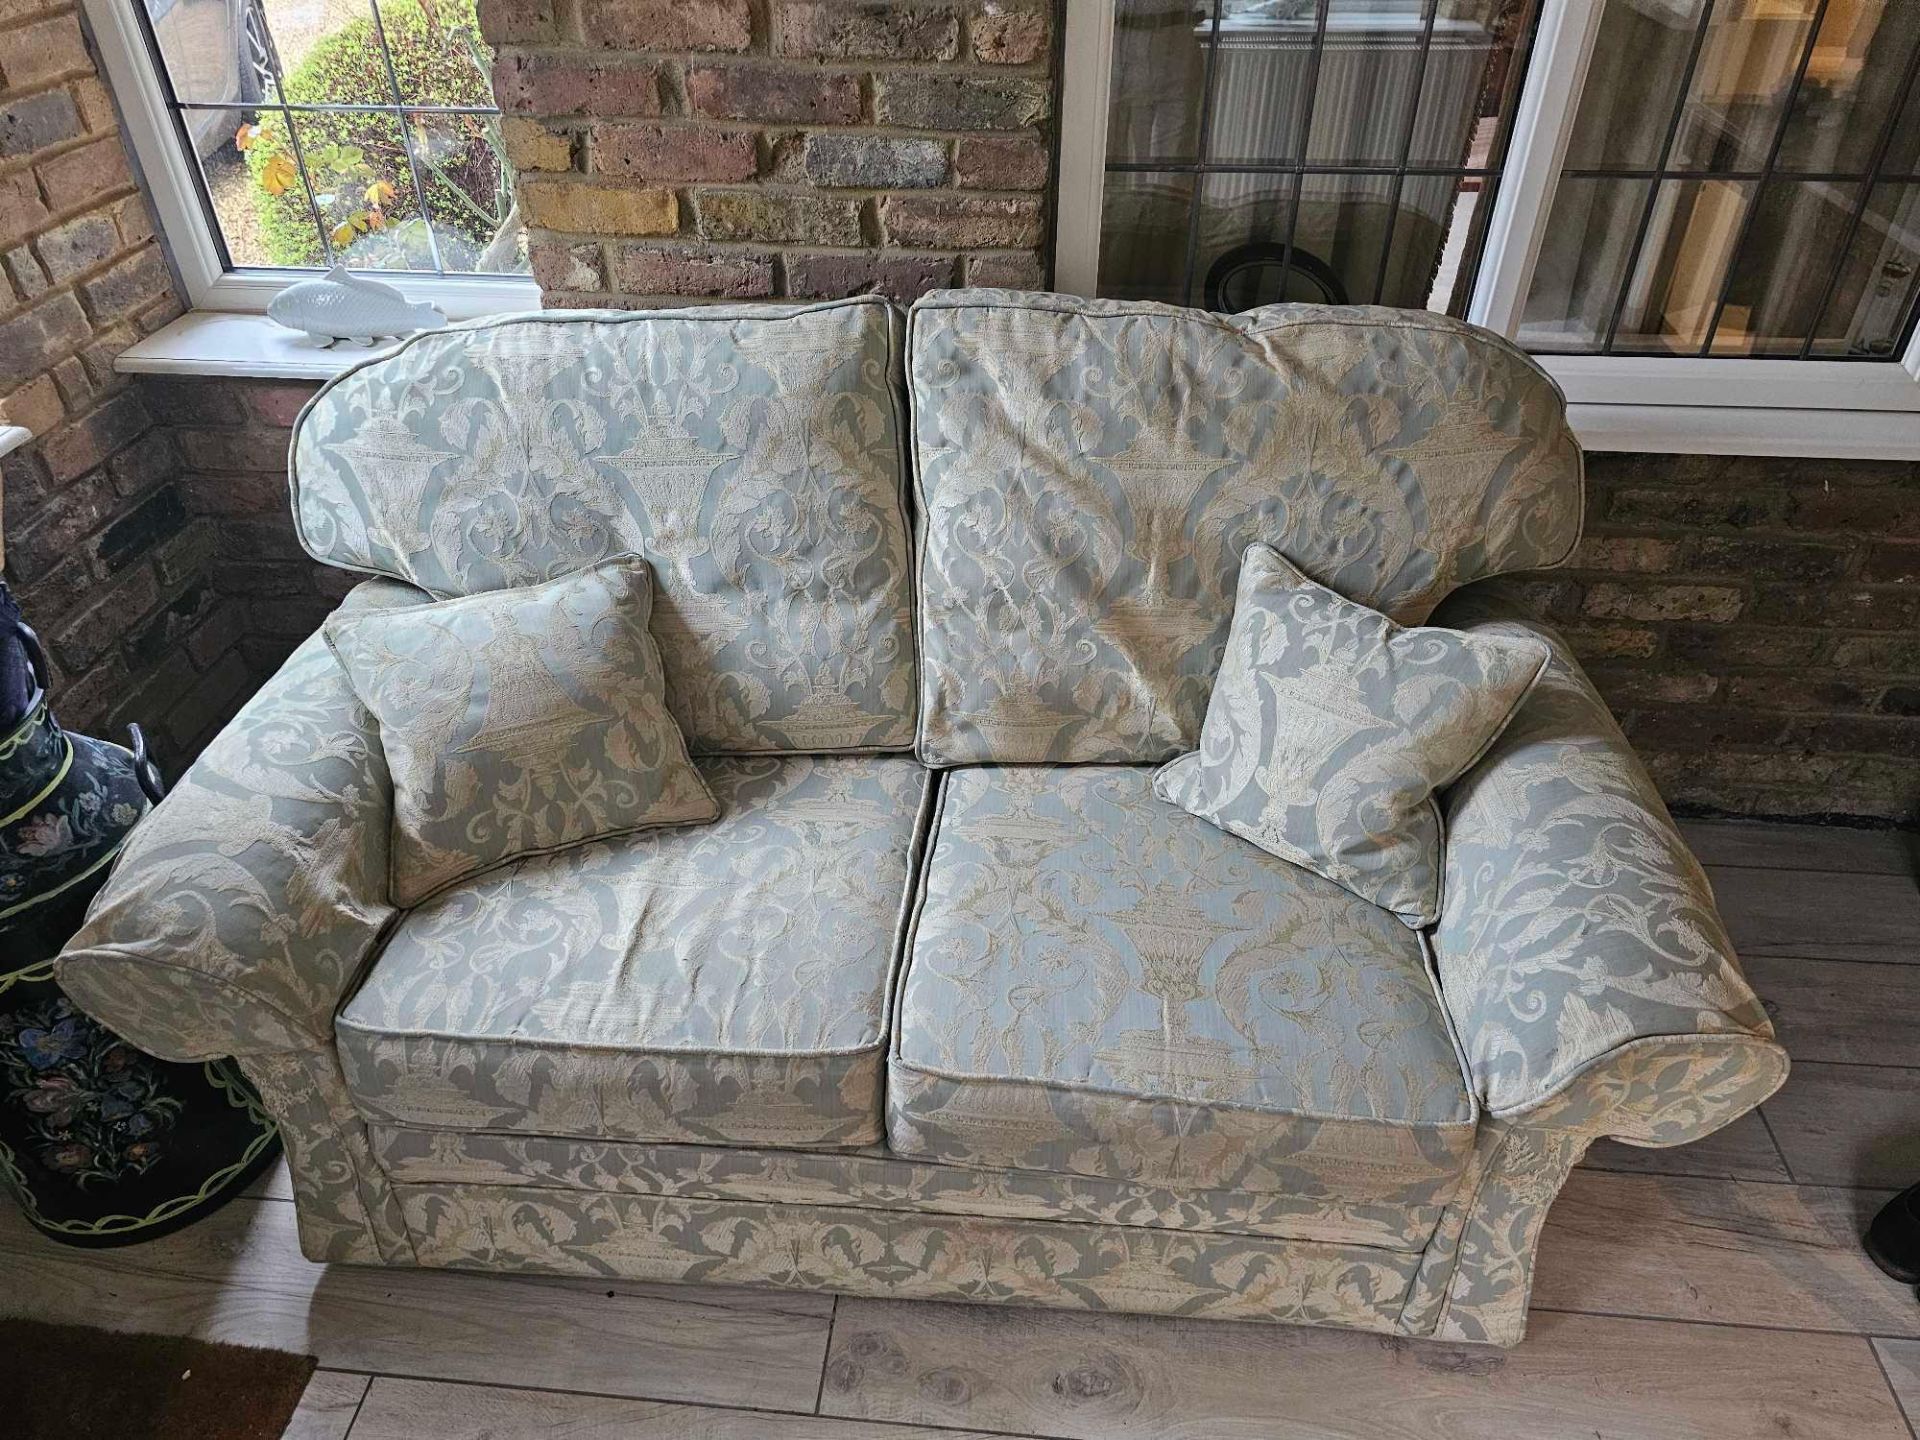 A Peter Guild Upholstered Two Seater Sofa In Damask Embossed Pattern Mint And Gold 160 X 87 X 95cm - Image 5 of 6